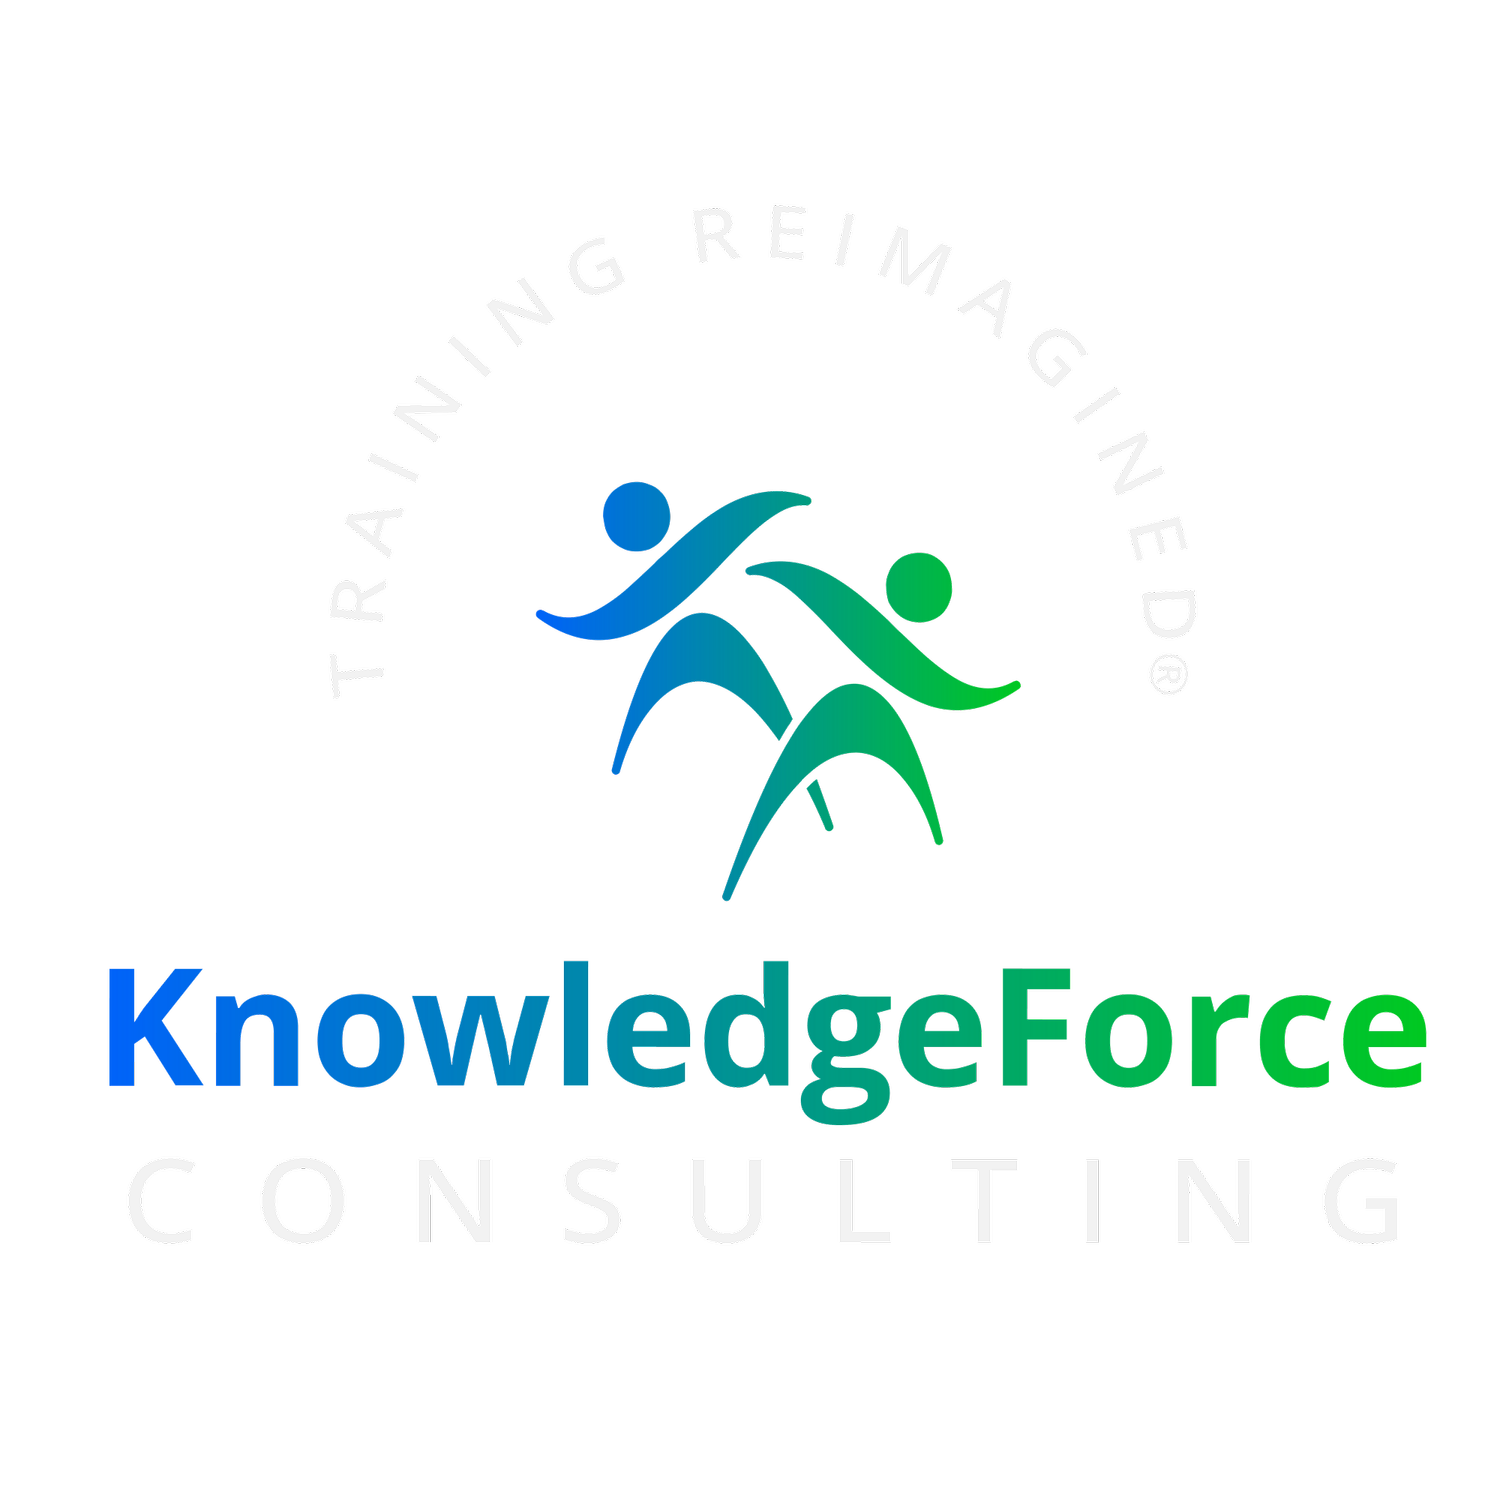 KnowledgeForce Consulting